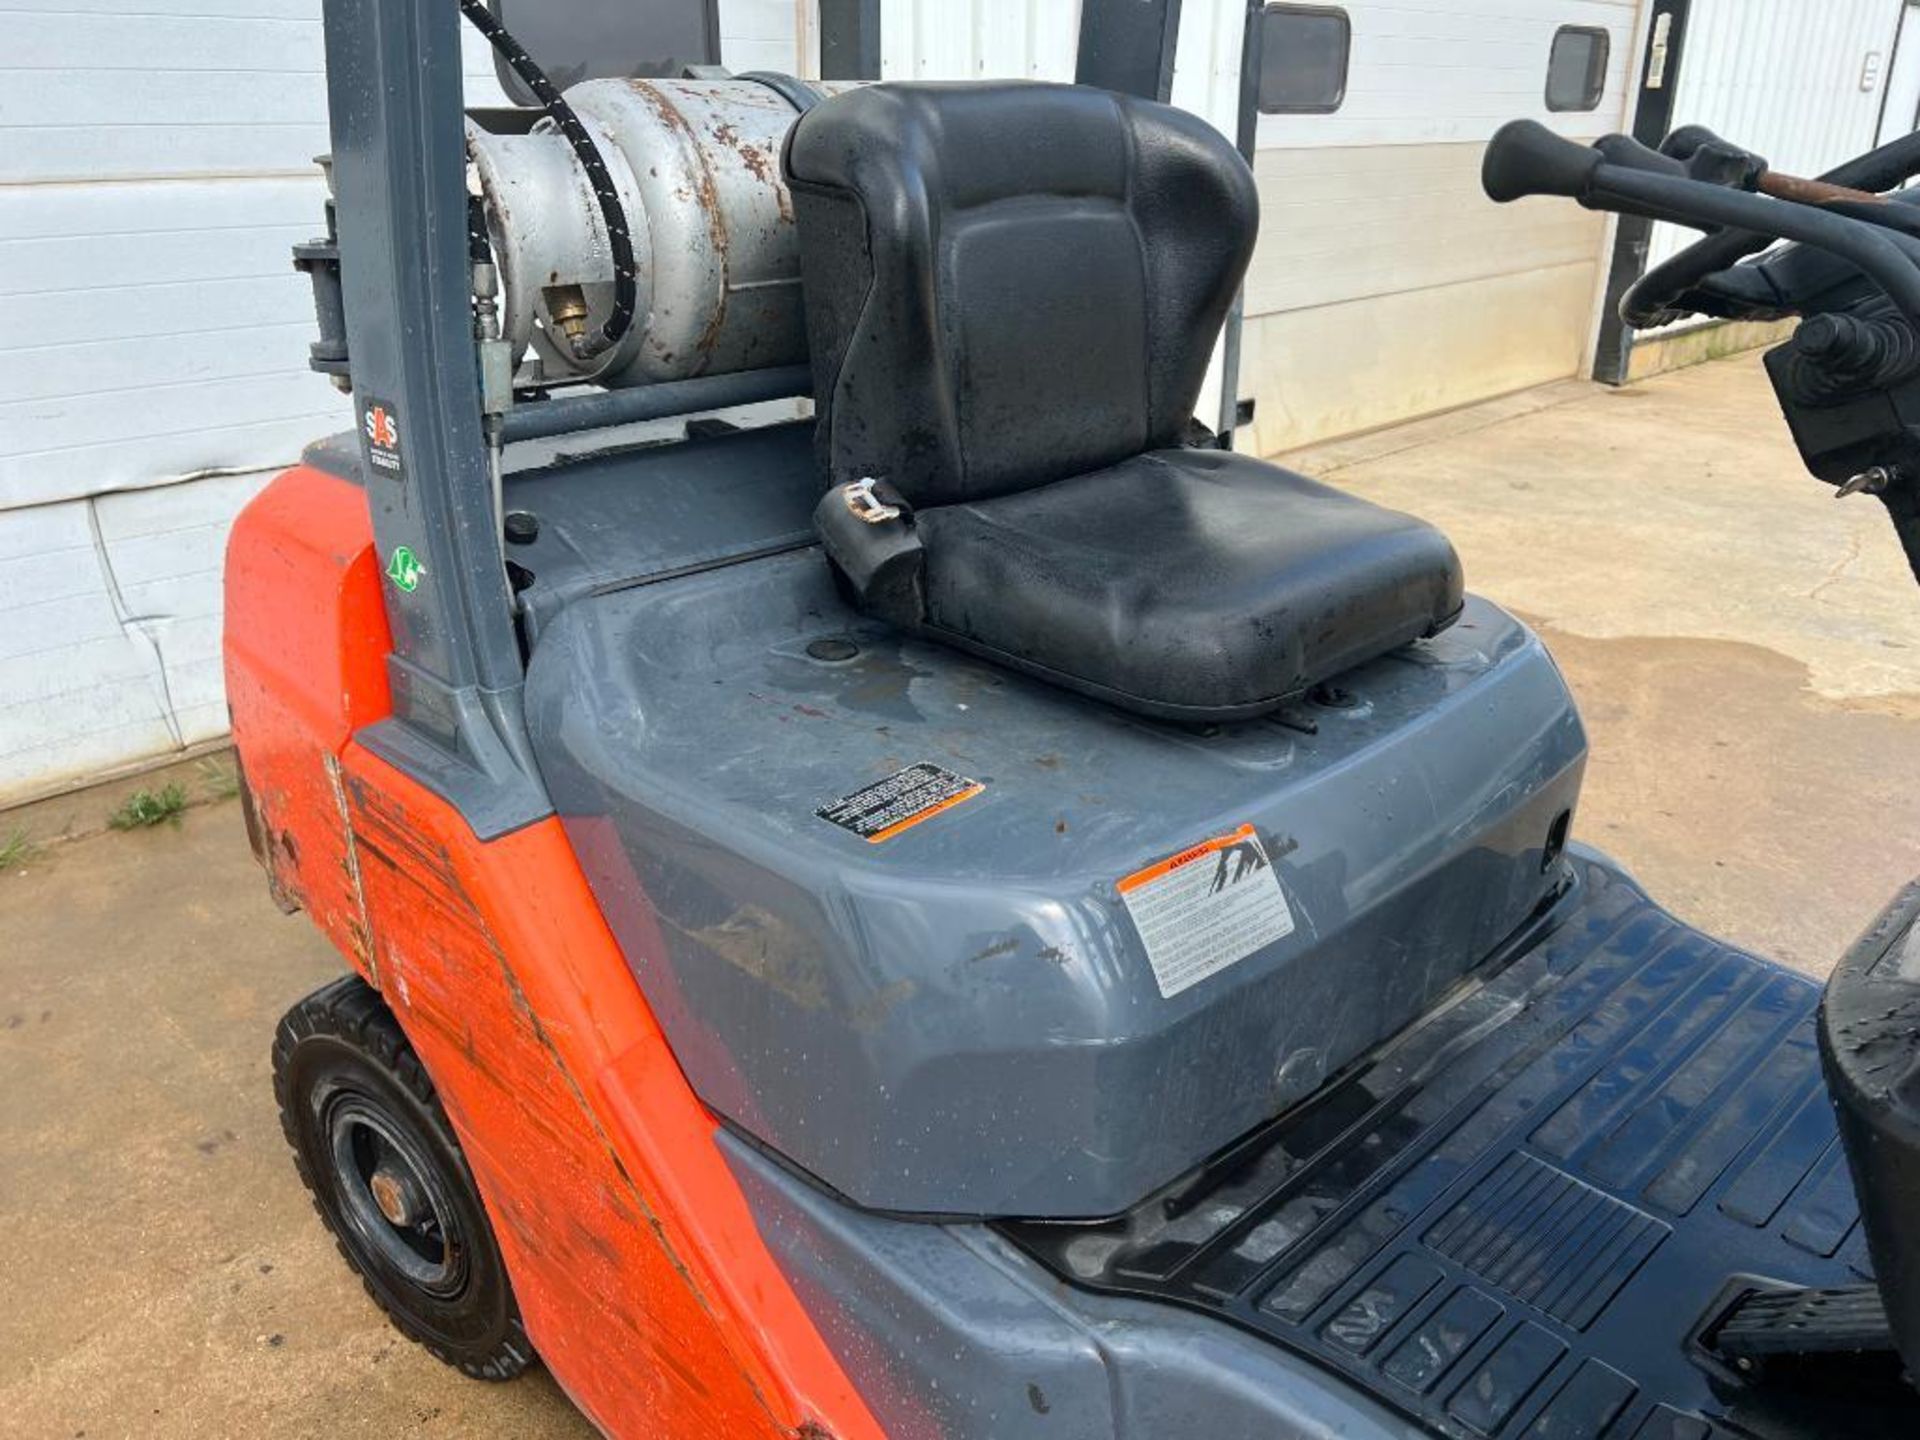 Toyota Forklift Truck, Model 8FGU25, Hours 5,264, LP. Located in Altamont, IL - Image 19 of 19